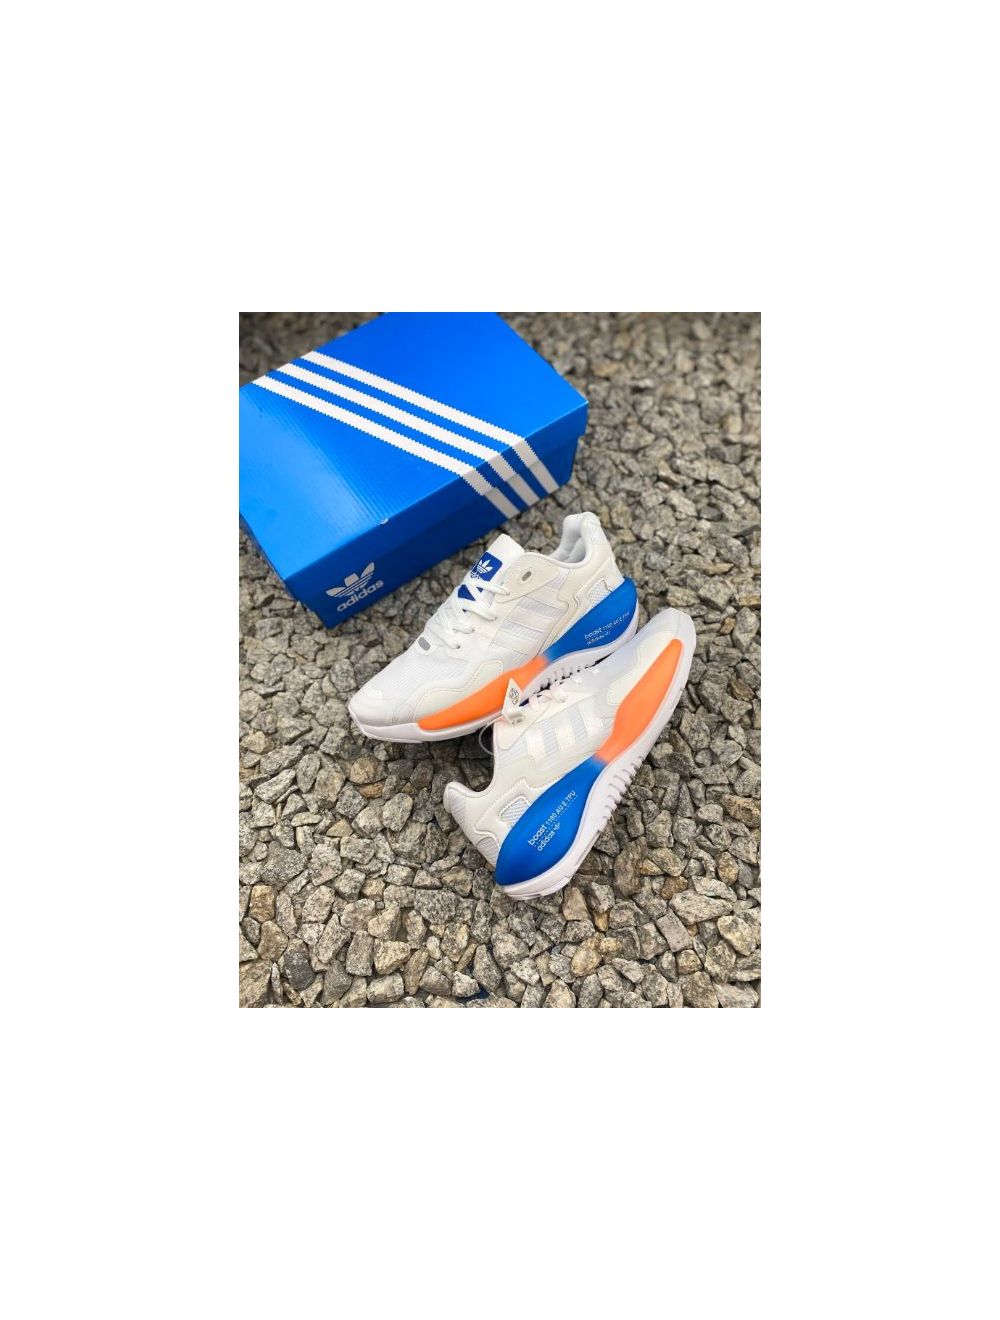 Grand delusion protect concrete Adidas ZX Alkyne Boost FV2315-9